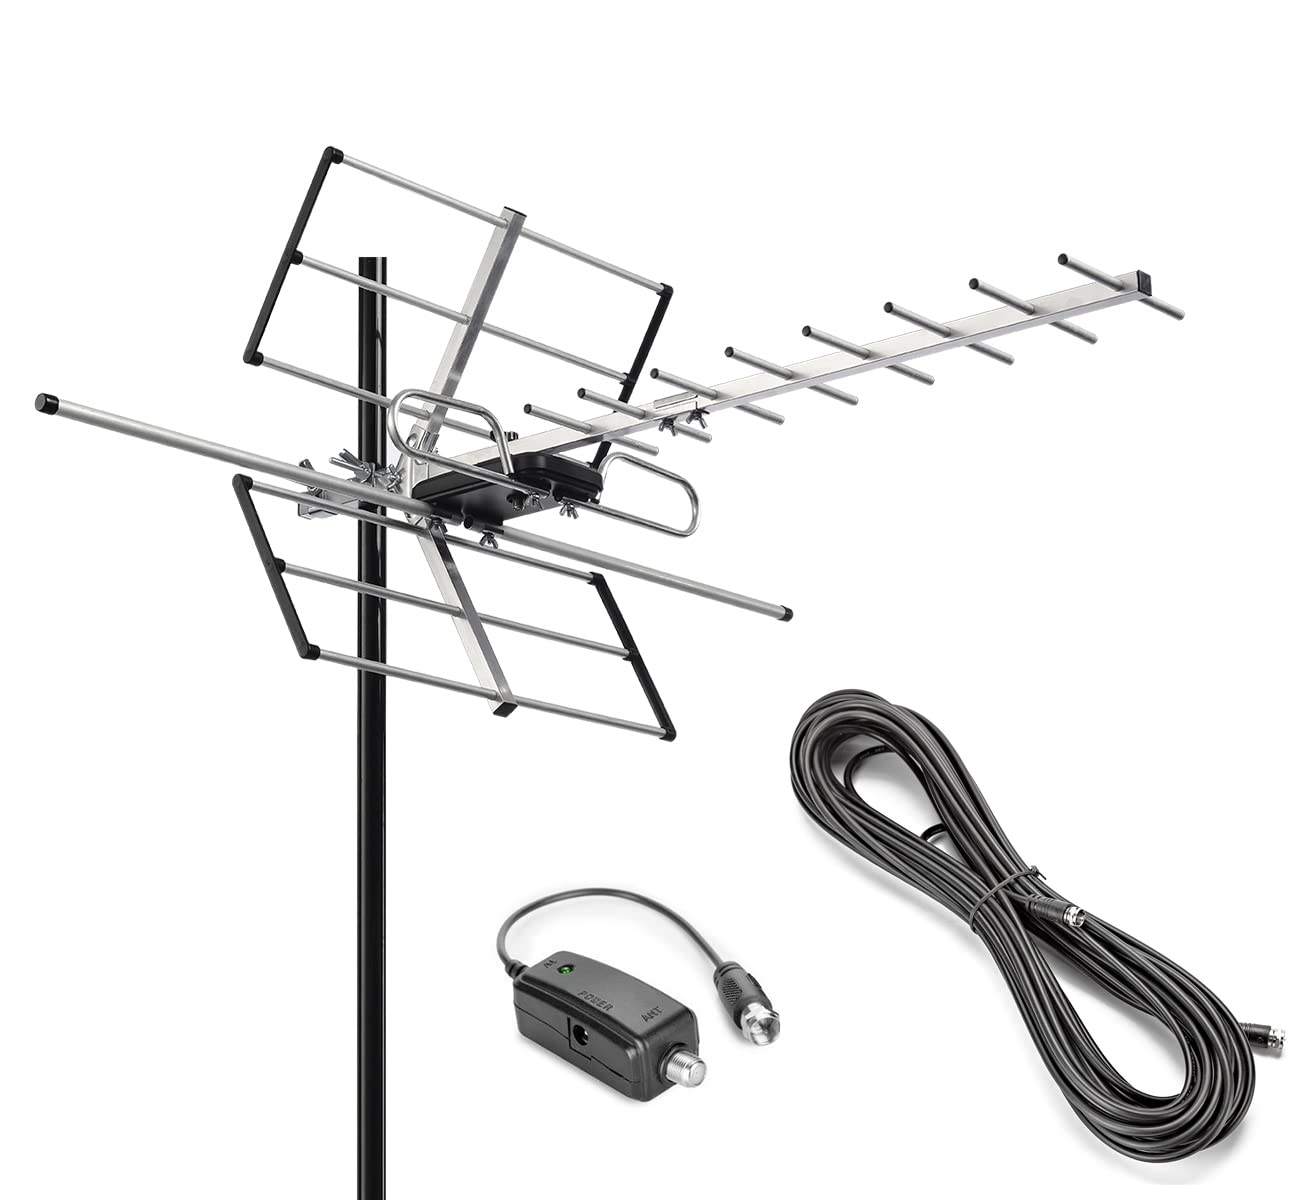 PIBIDI Outdoor Digital Amplified Yagi HDTV Antenna, Built-in High Gain and Low Noise Amplifier, 40FT RG6 Coaxial Cable, 120 Miles Range with UHF and VHF Signal